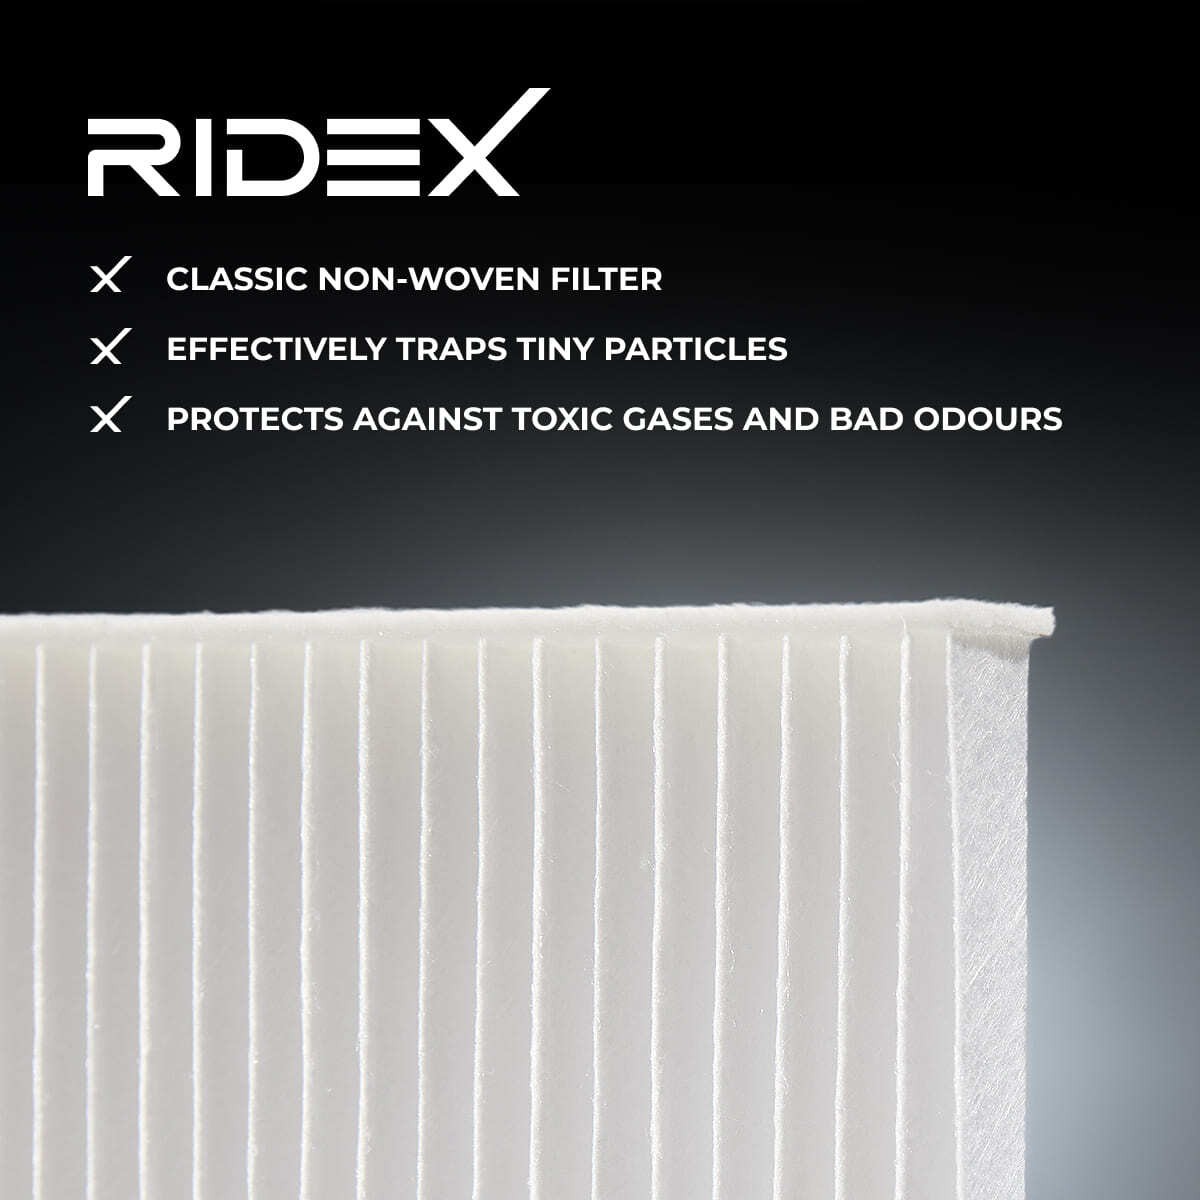 424I0115 Air con filter 424I0115 RIDEX Particulate Filter, 248 mm x 198 mm x 19 mm, Paper